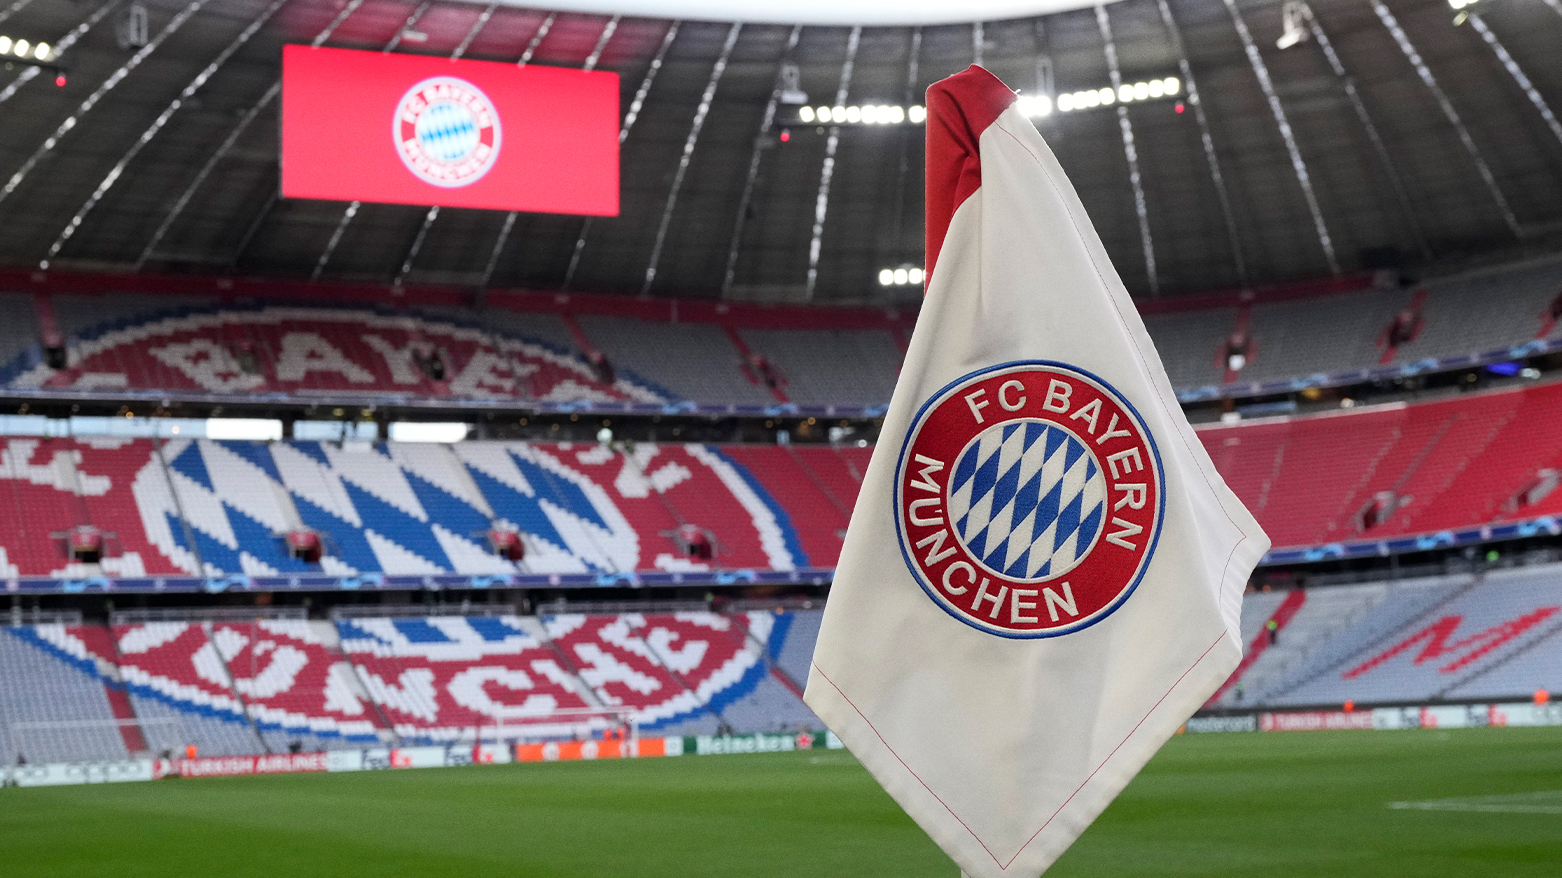 A corner flag of Bayern Munich is viewed on the pitch prior to the Champions League semifinal first leg. (Photo: AP)